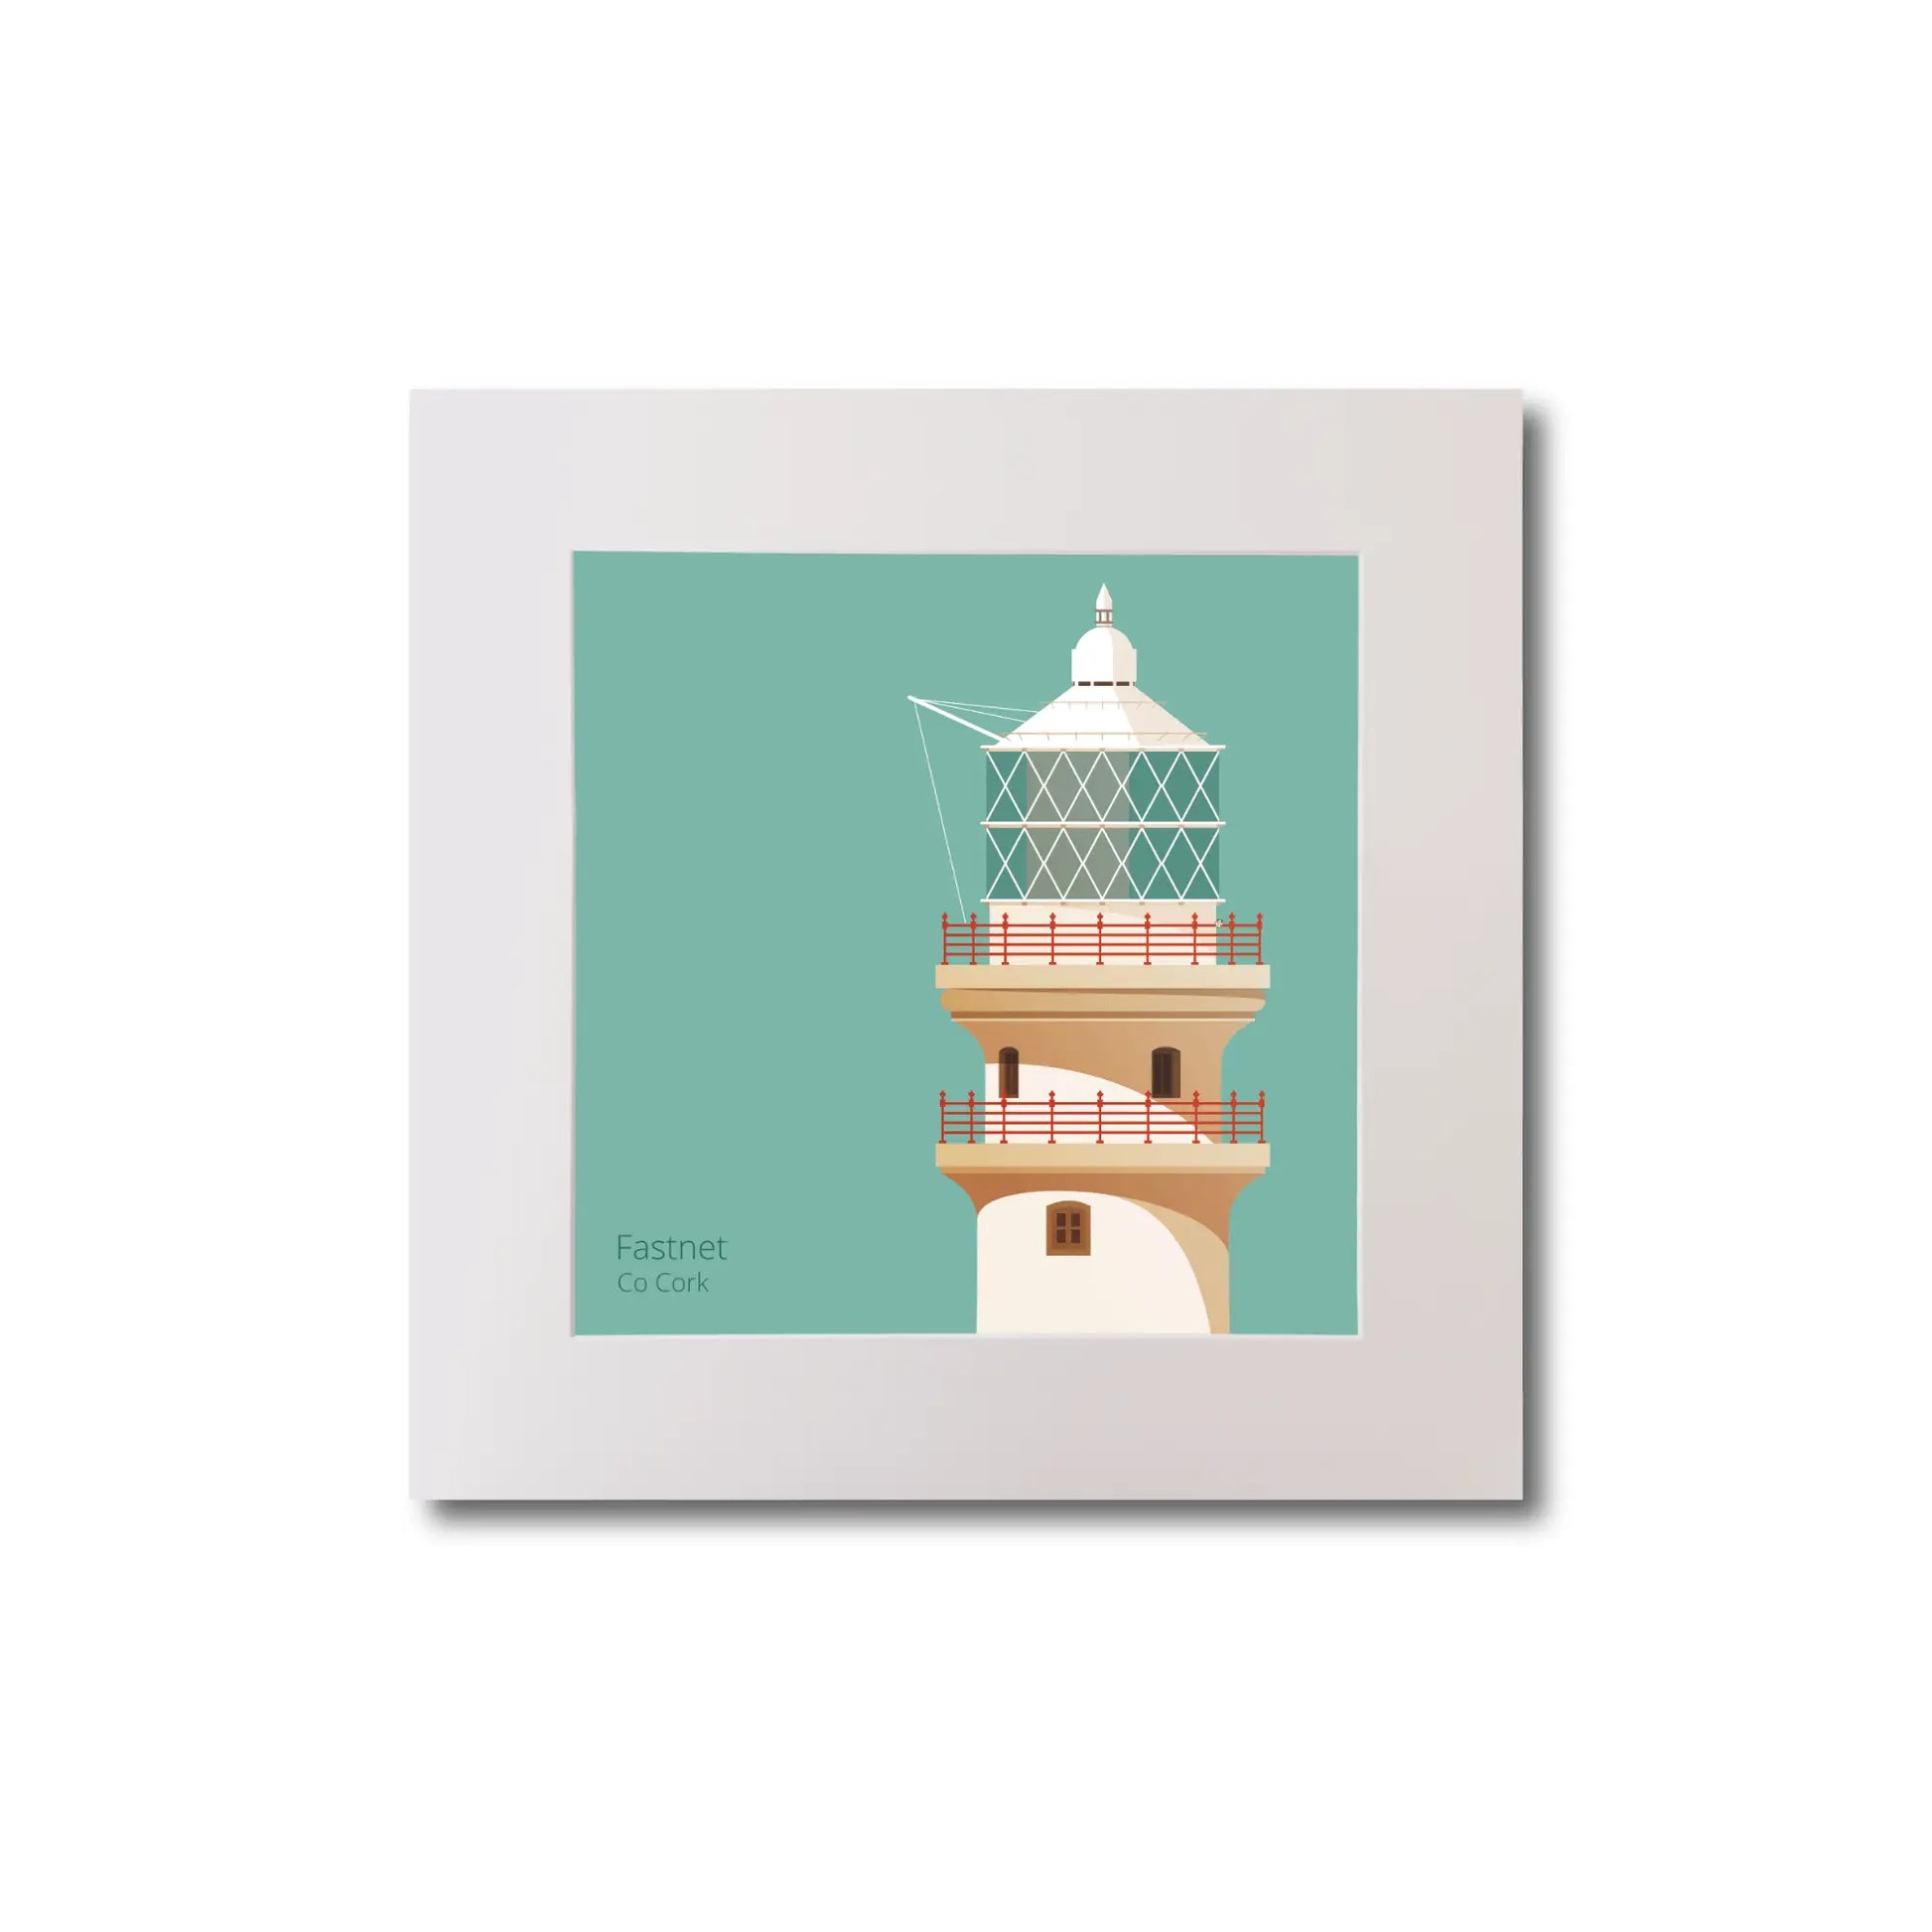 Illustration of Fastnet lighthouse on an ocean green background, mounted and measuring 20x20cm.